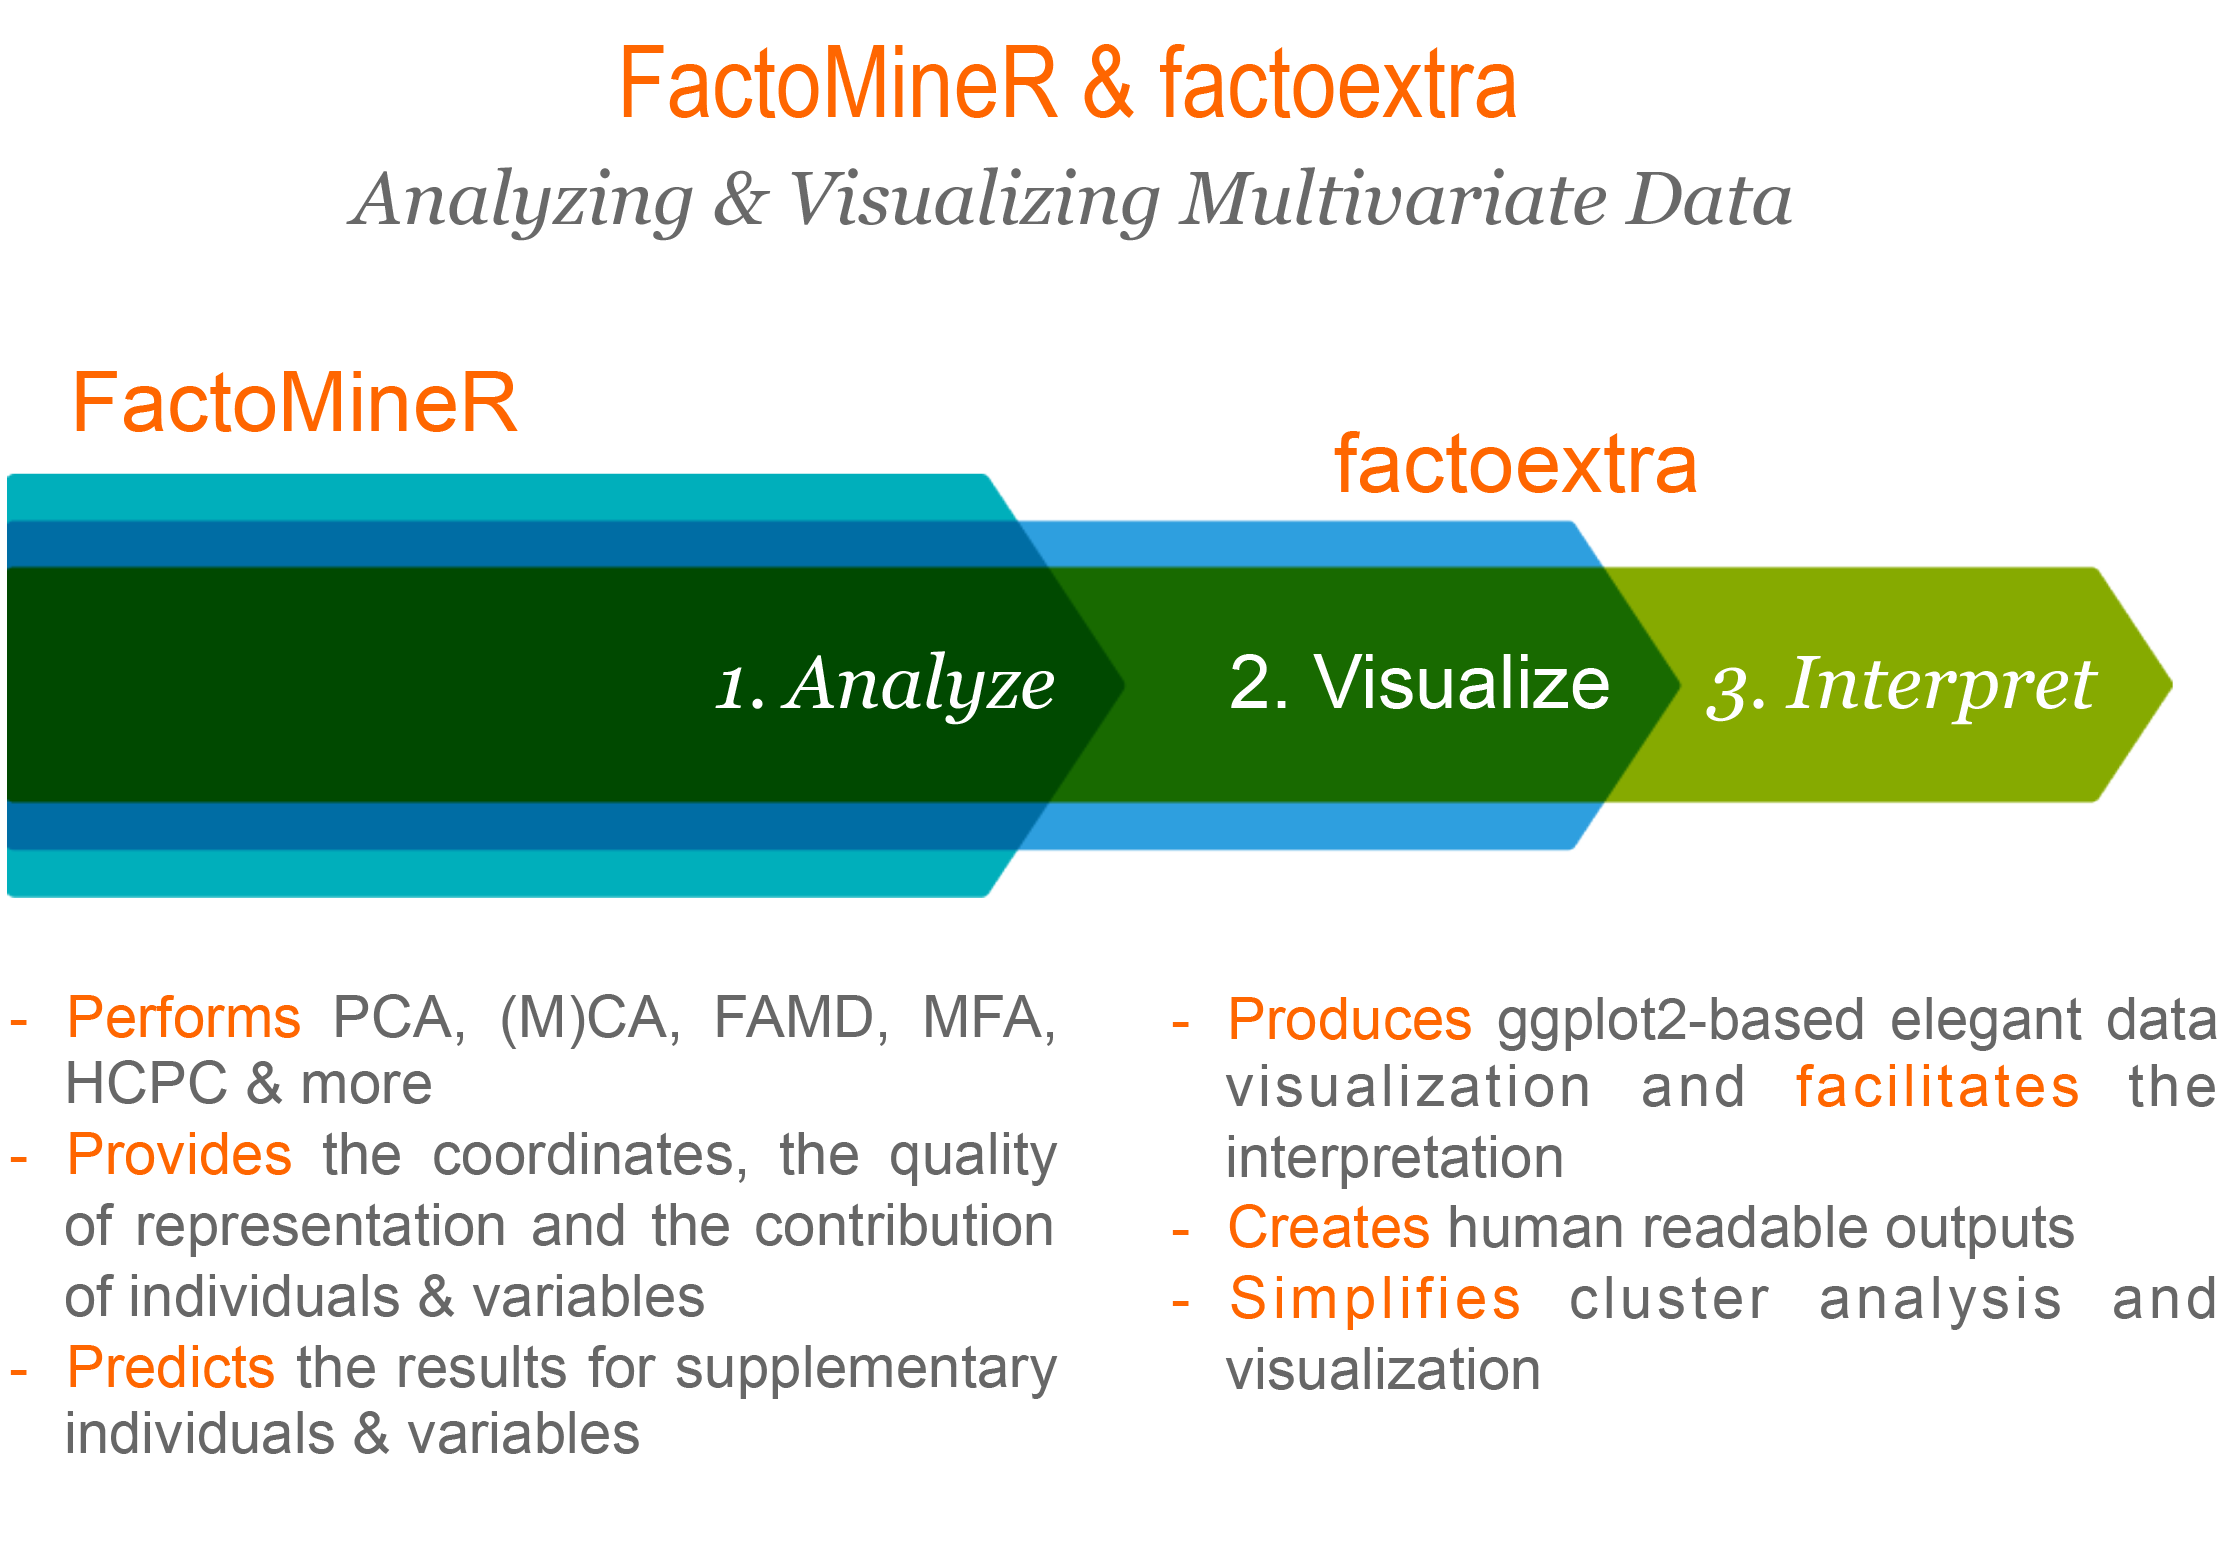 Key features of FactoMineR and factoextra for multivariate analysis